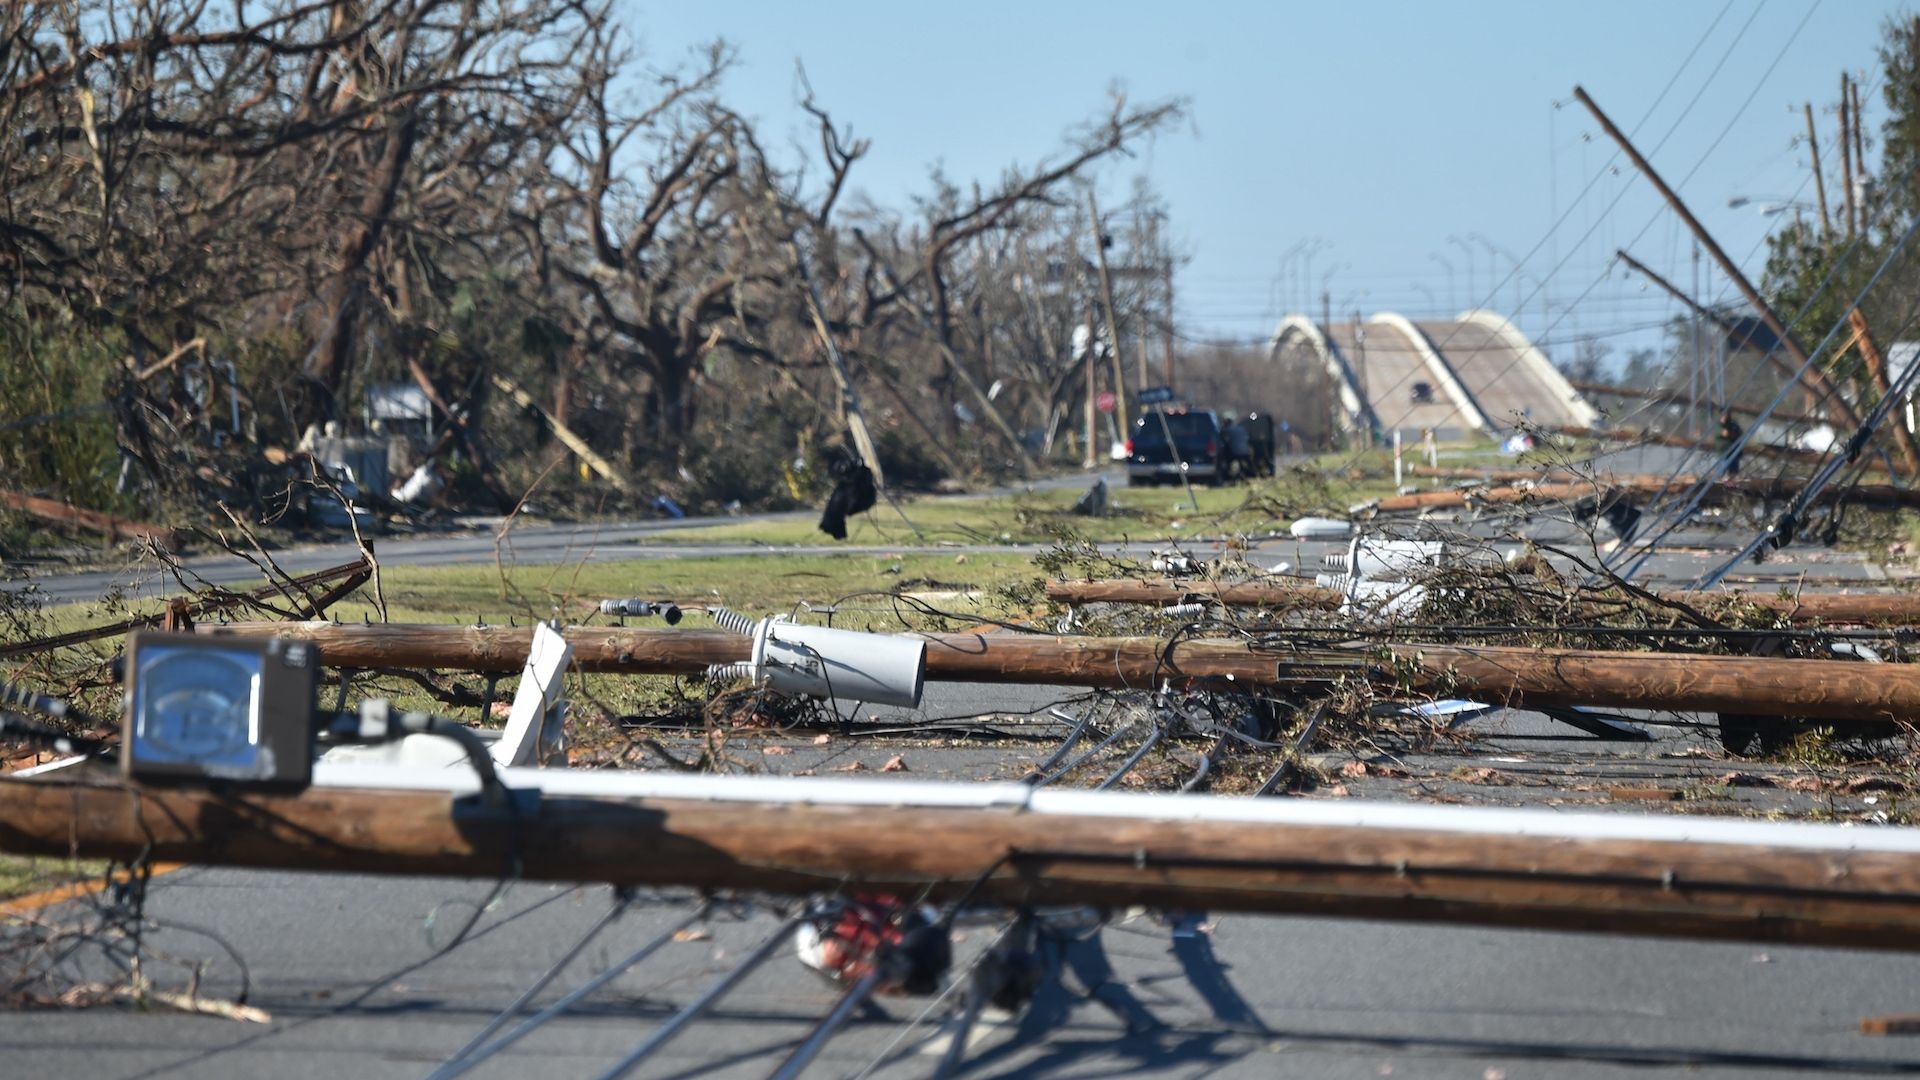 Fallen electrical poles block a road in the aftermath of Hurricane Michael on October 12, 2018 in Panama City, Florida.